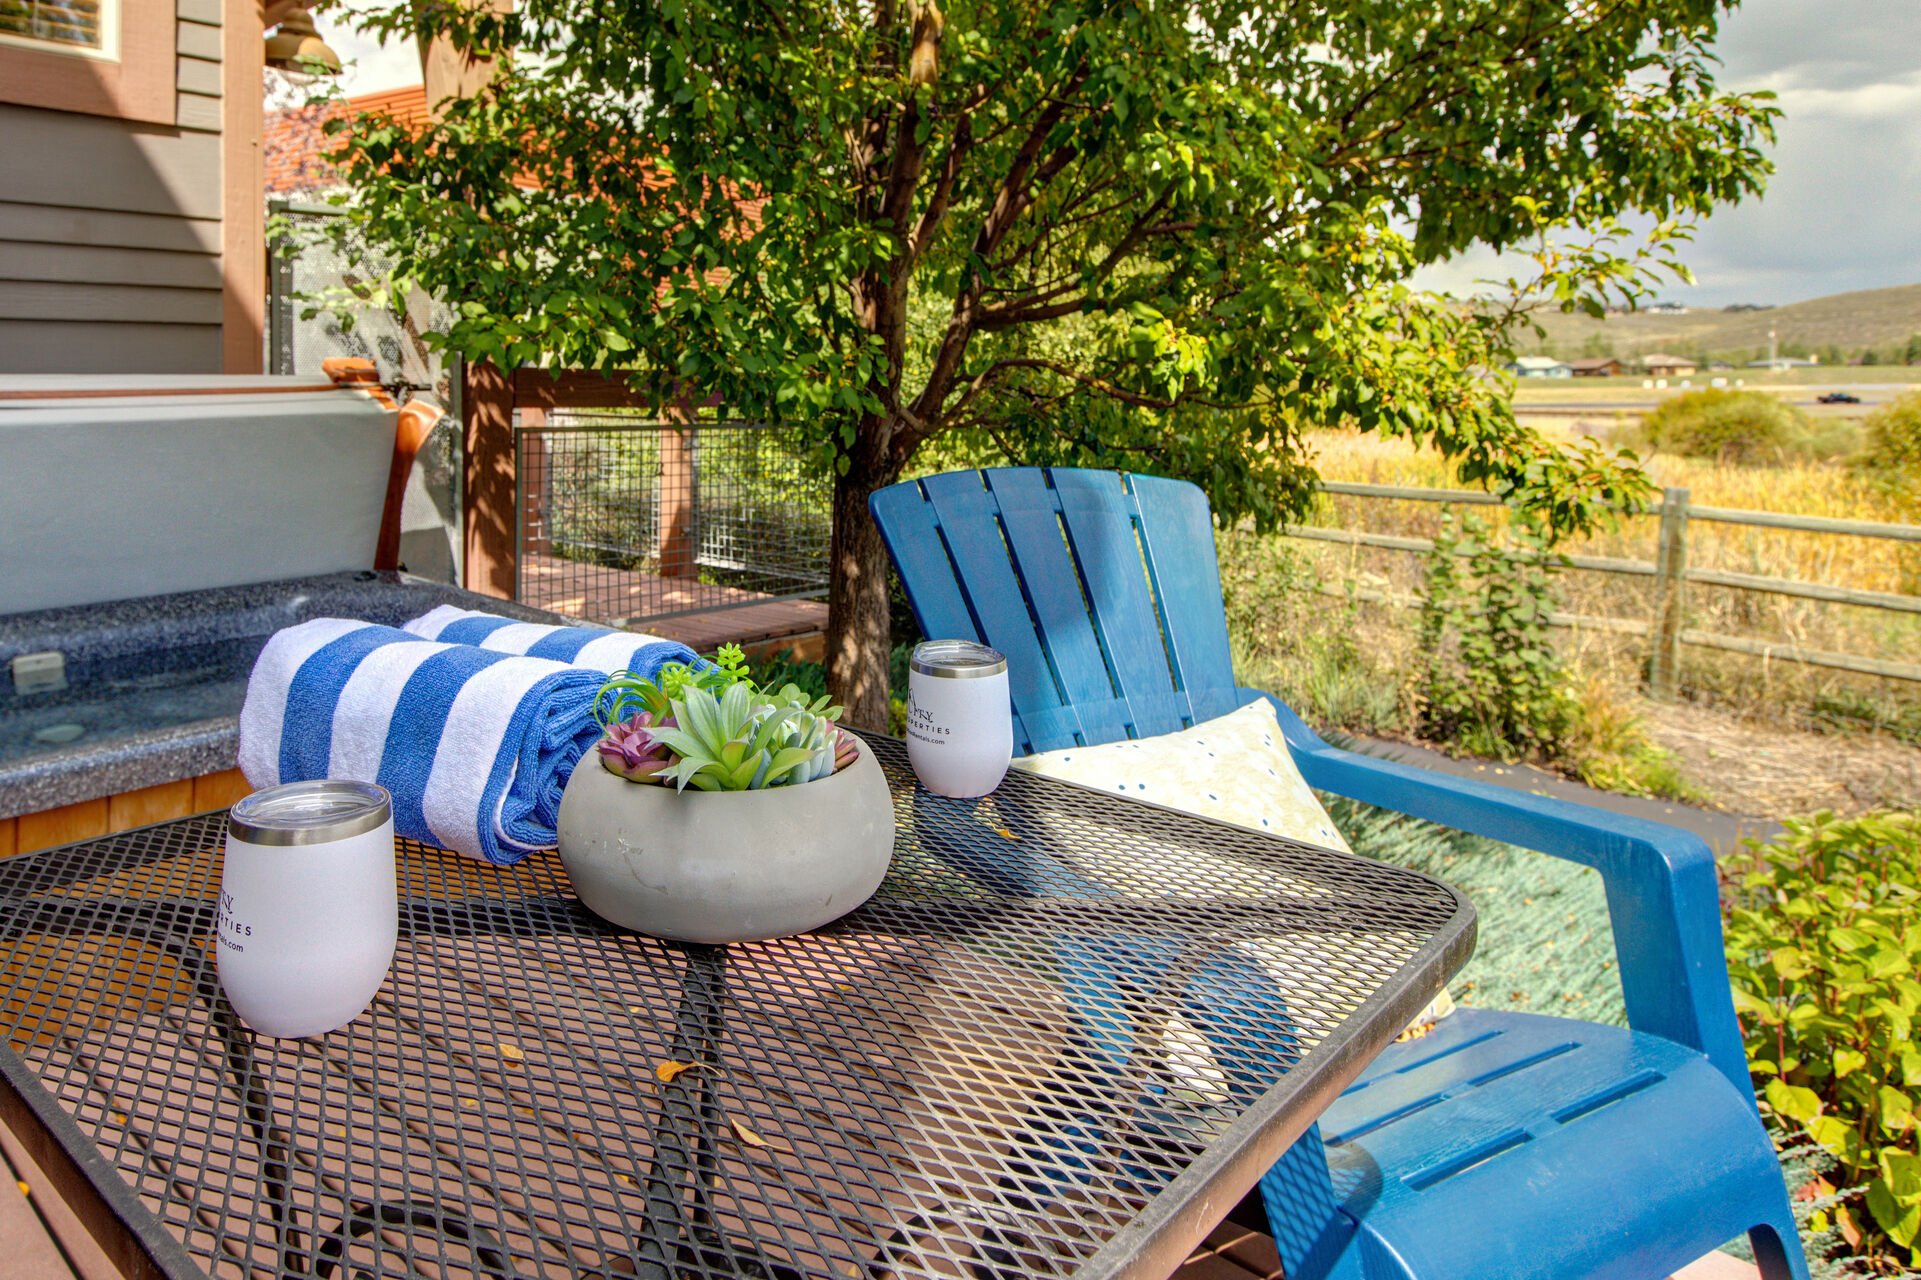 Main Level private patio with hot tub, table and chairs for two, and spectacular surrounding views of the nature preserve and biking/hiking trails